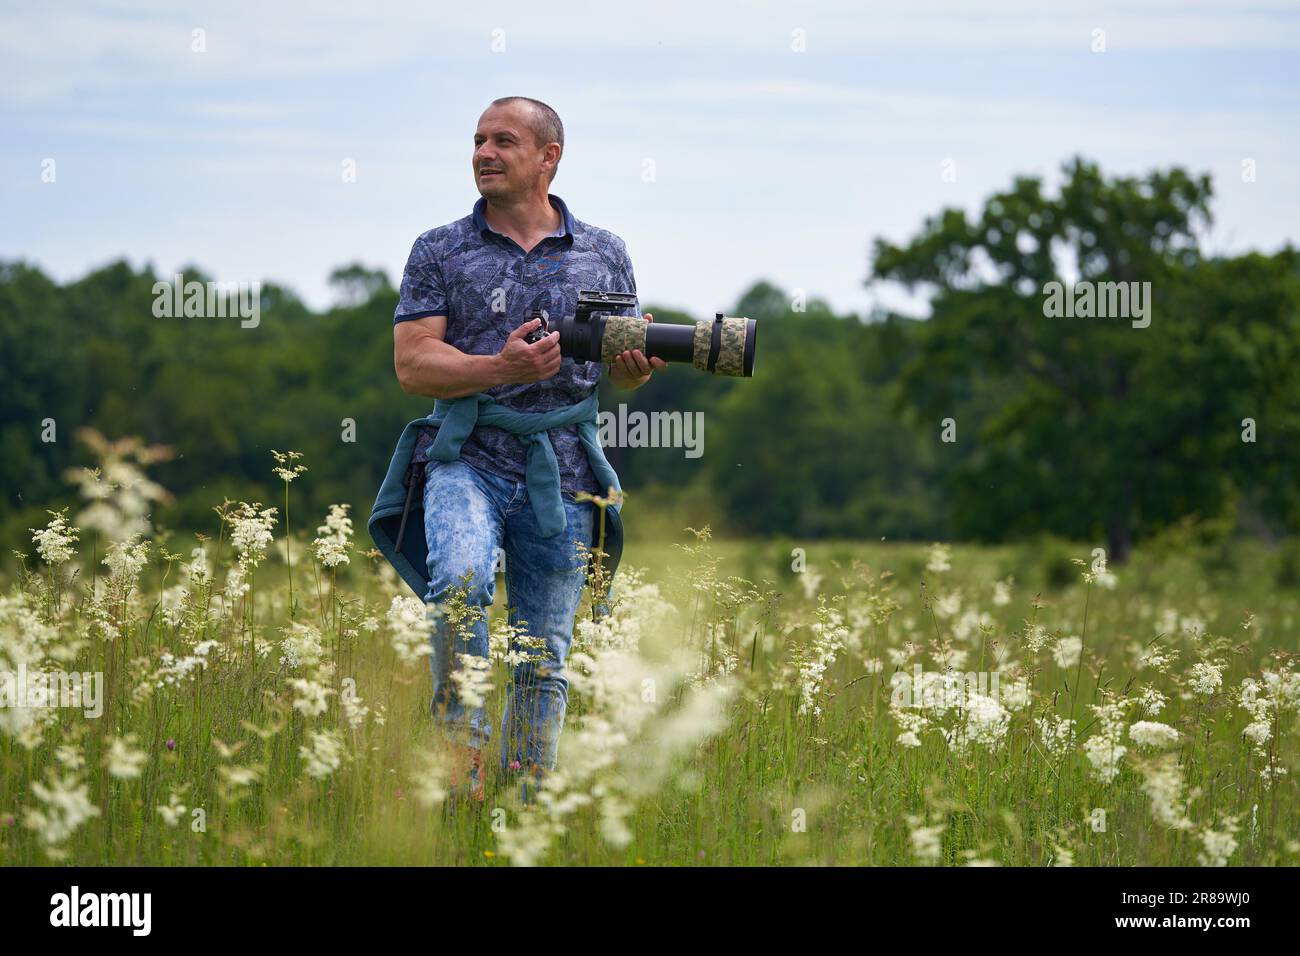 Professional nature photographer in the field by the forest, holding camera with a long telephoto lens Stock Photo